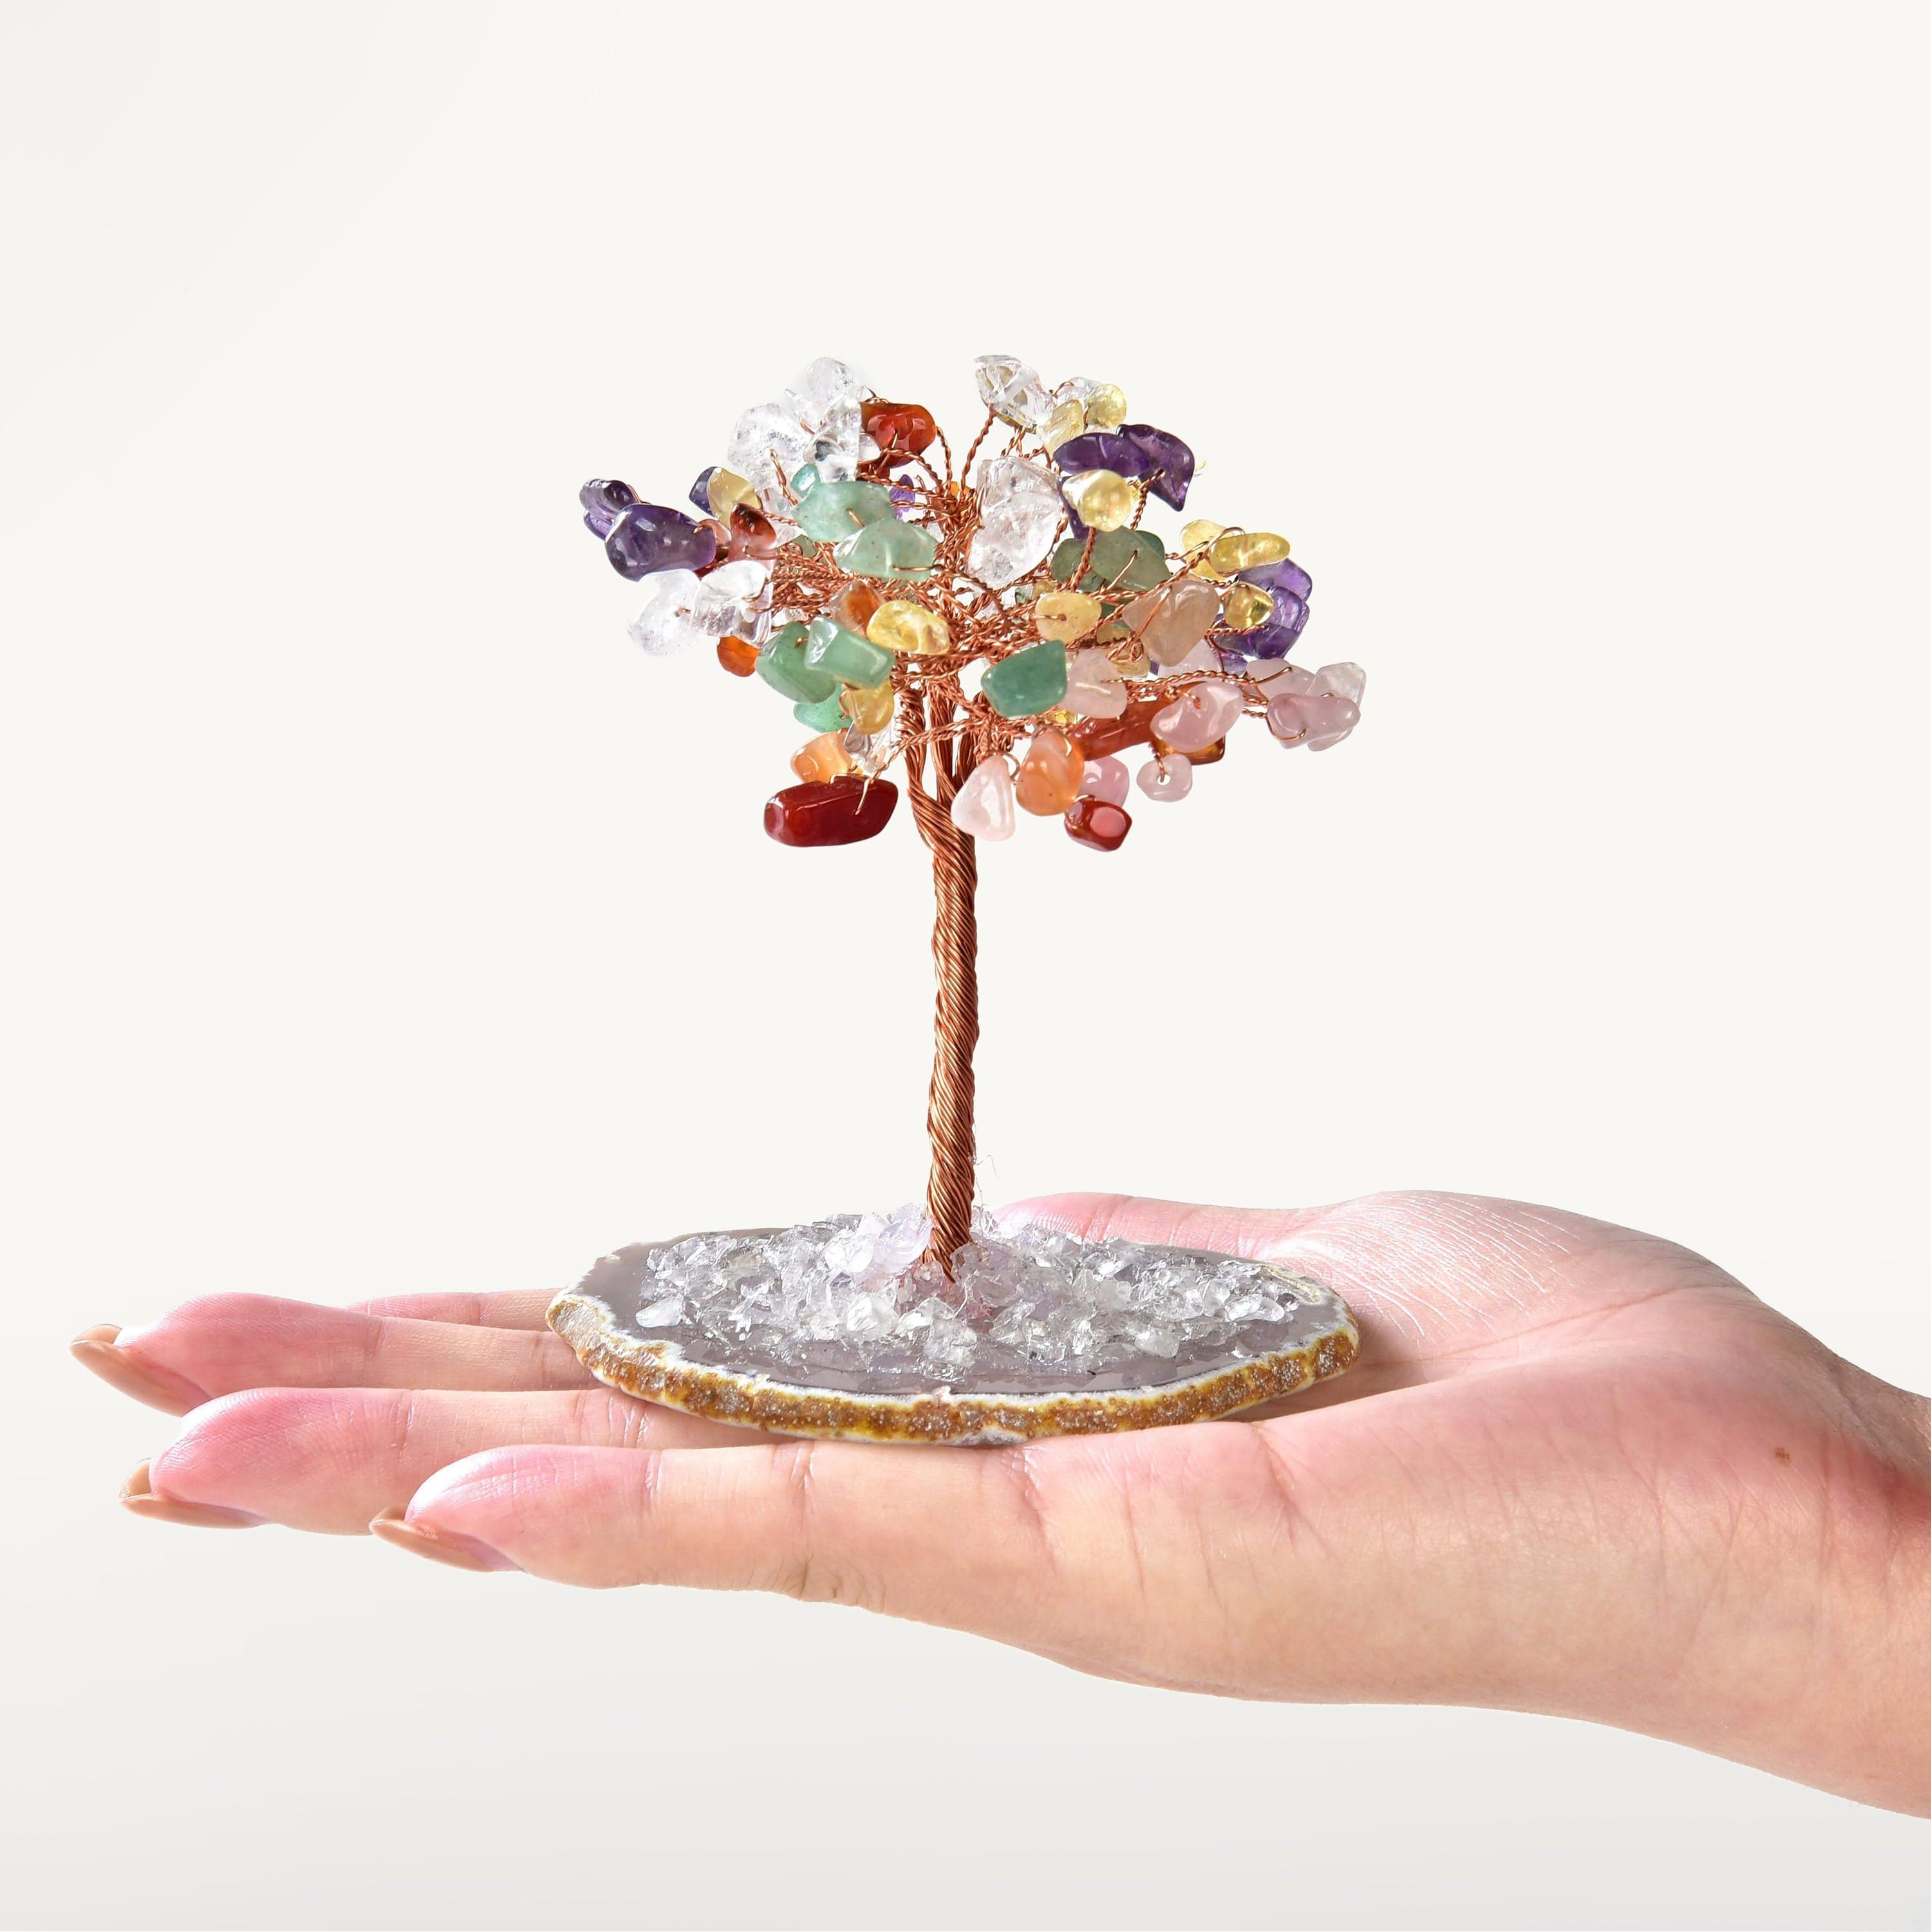 Kalifano Gemstone Trees Multi-color Natural Gemstone Tree of Life with Agate Base K917A-MT